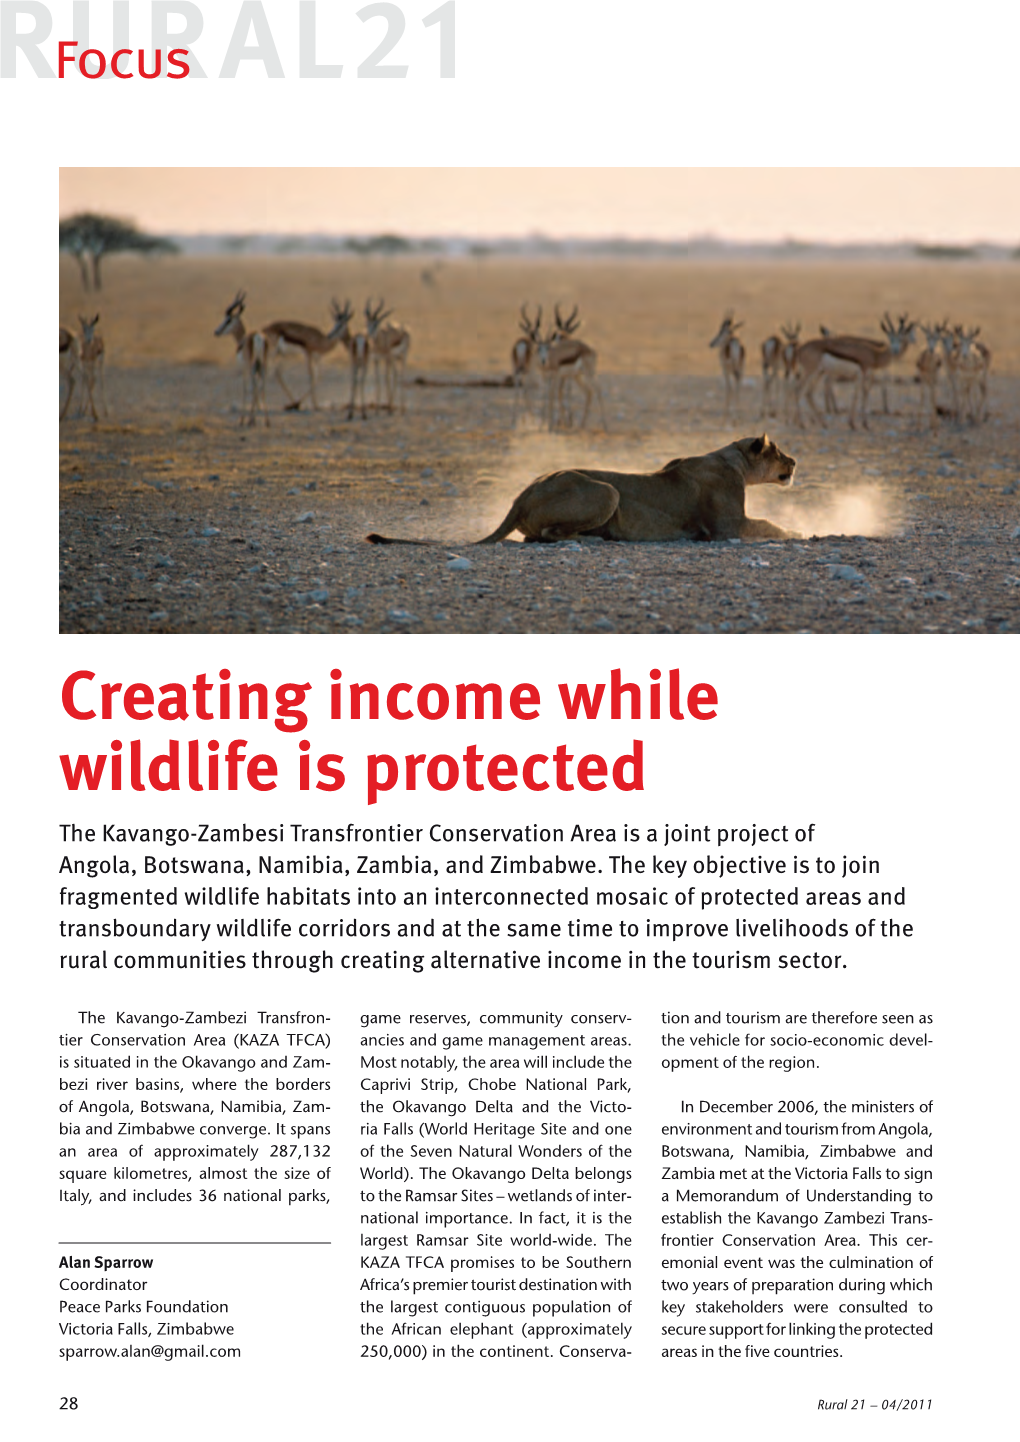 Creating Income While Wildlife Is Protected the Kavango-Zambesi Transfrontier Conservation Area Is a Joint Project of Angola, Botswana, Namibia, Zambia, and Zimbabwe